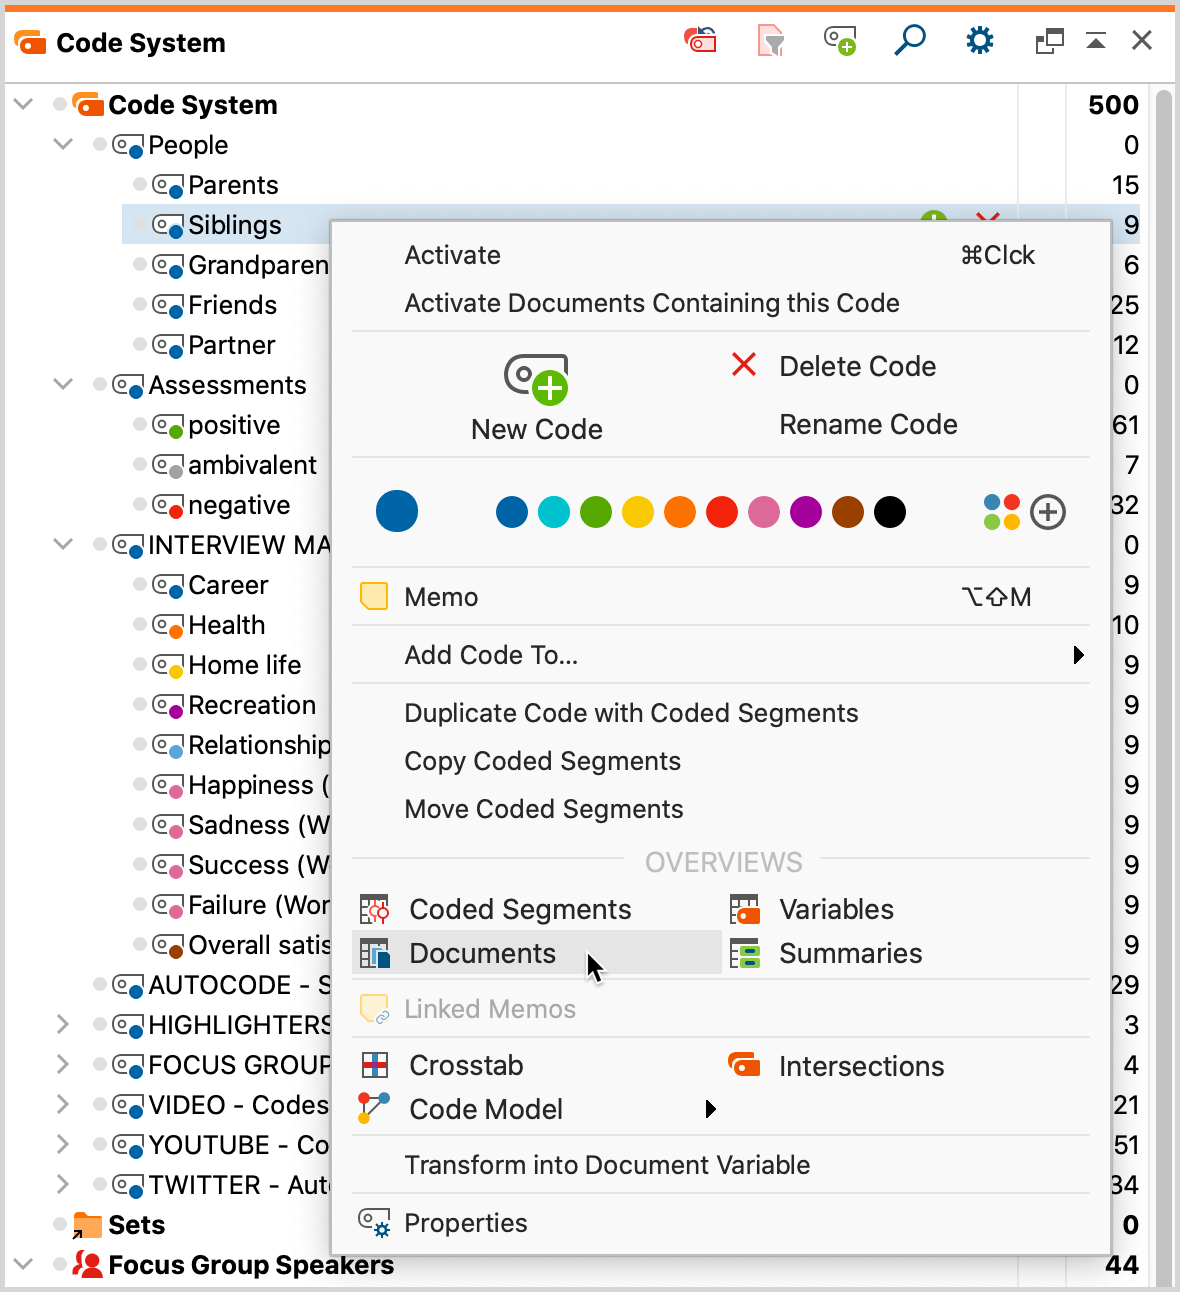 Access the “Overview of Documents“ in the context menu for a code